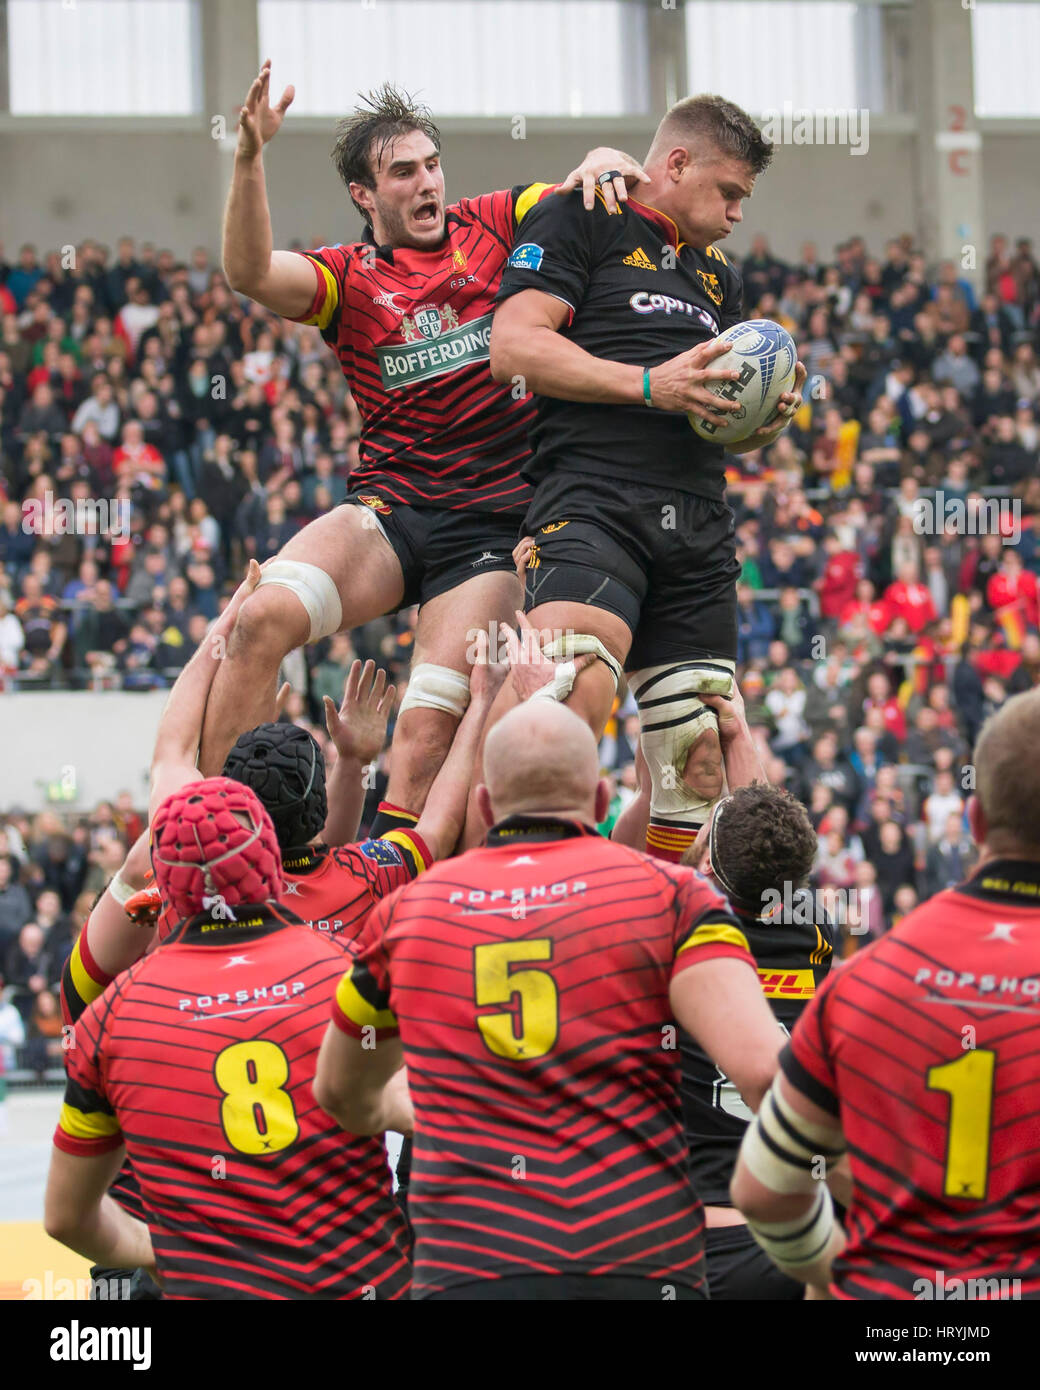 Sebastian Ferreira (Germany, 7) in action during the 3rd Rugby Europe  Championship match between Germany and Belgium in Offenbach/Main, Germany,  4 March 2017. Photo: Jürgen Keßler/dpa Stock Photo - Alamy